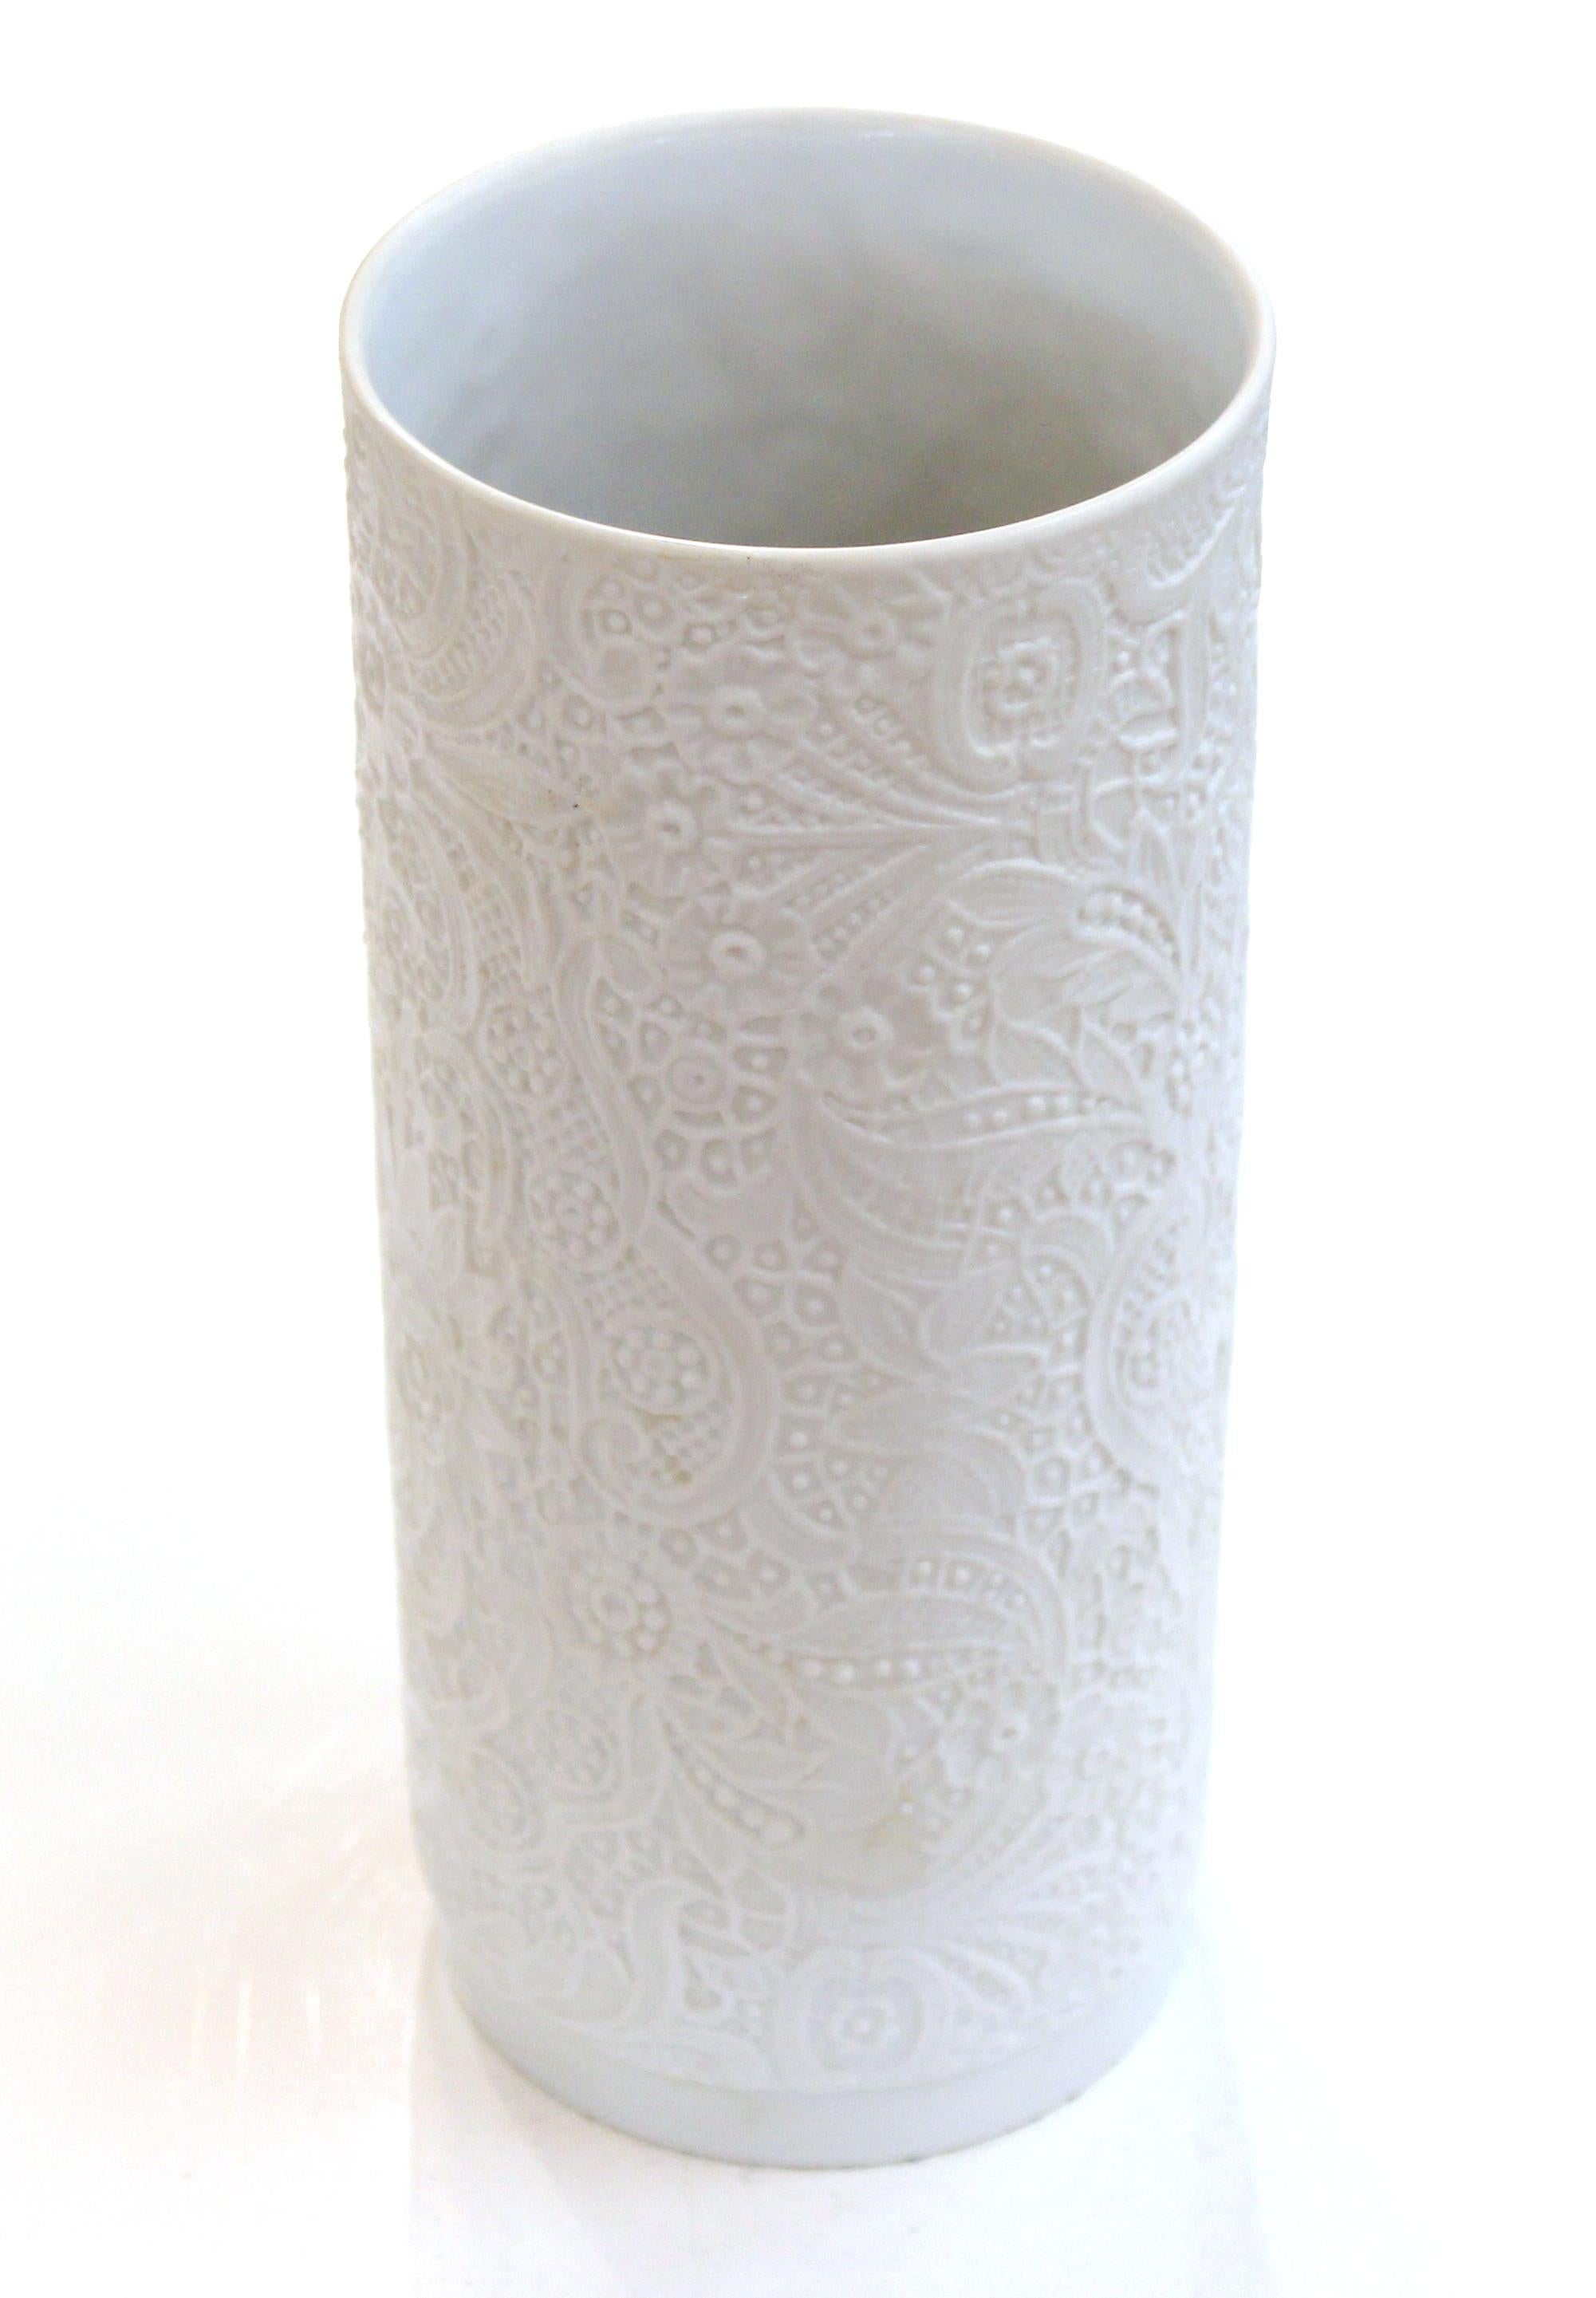 Rosenthal German Modern white porcelain bisque op-art vase with lace surface design, marked on the bottom.